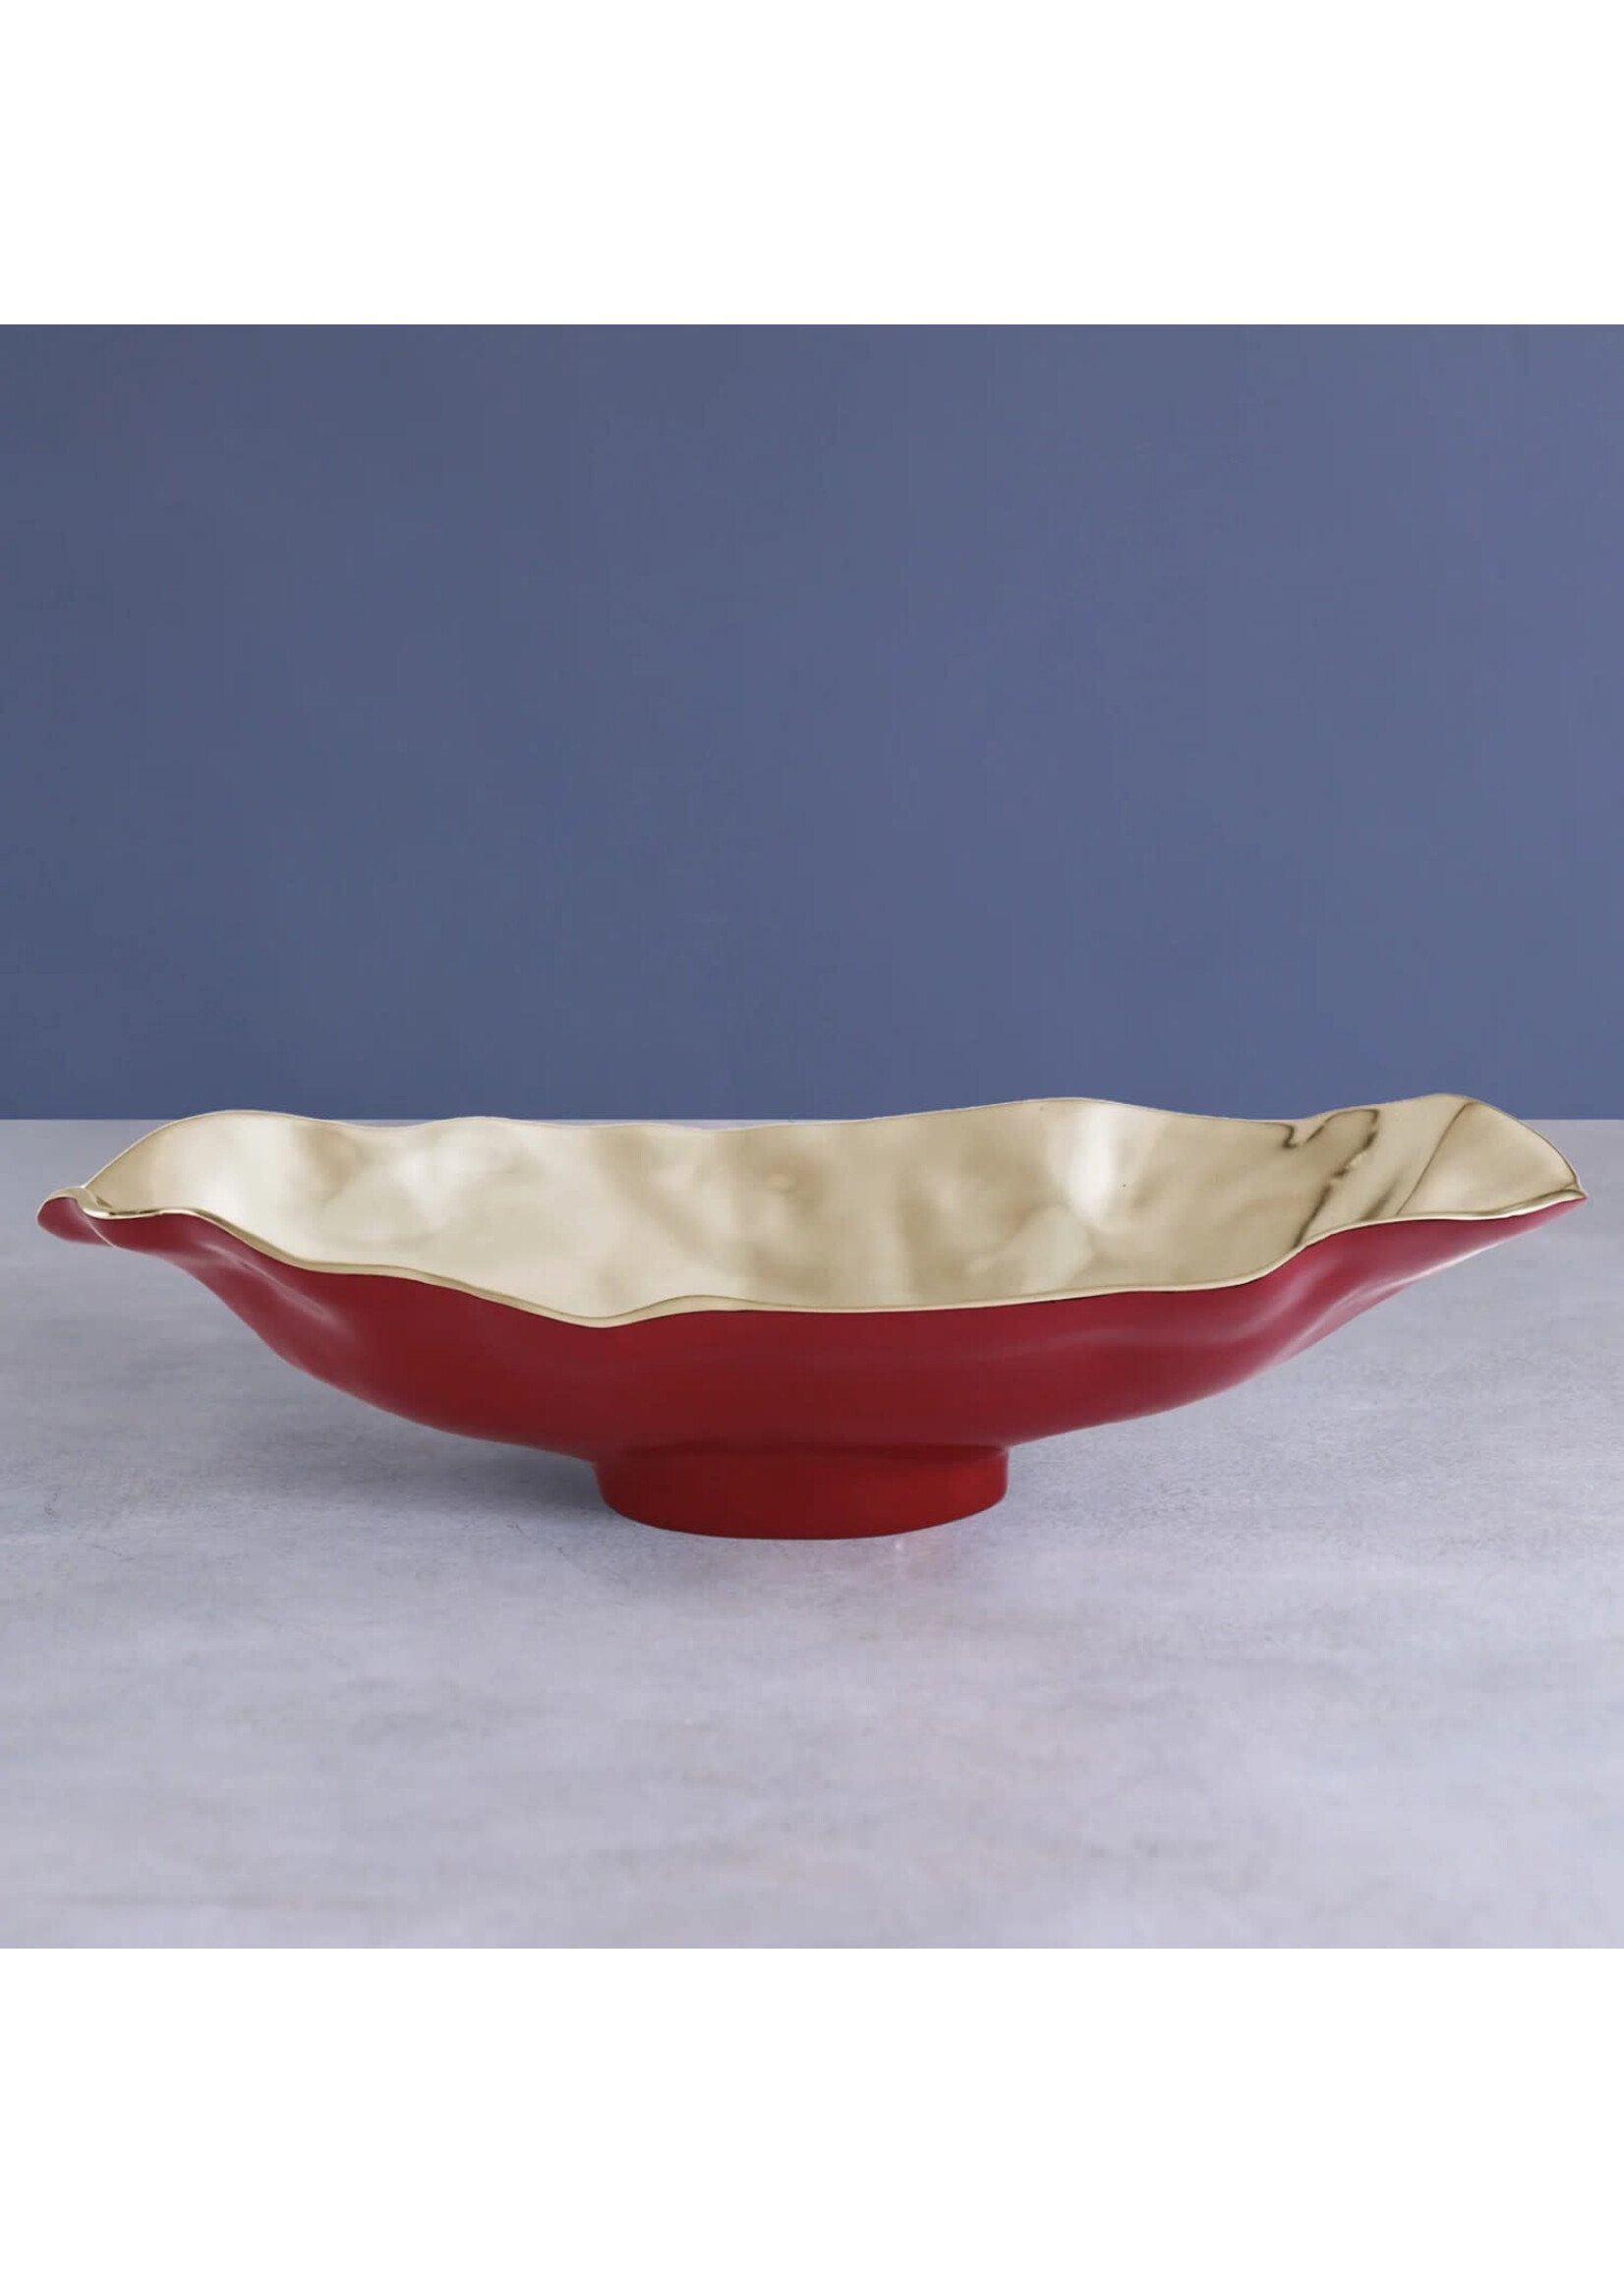 Beatriz Ball Thanni Maia Medium Oval Bowl, Red and Gold